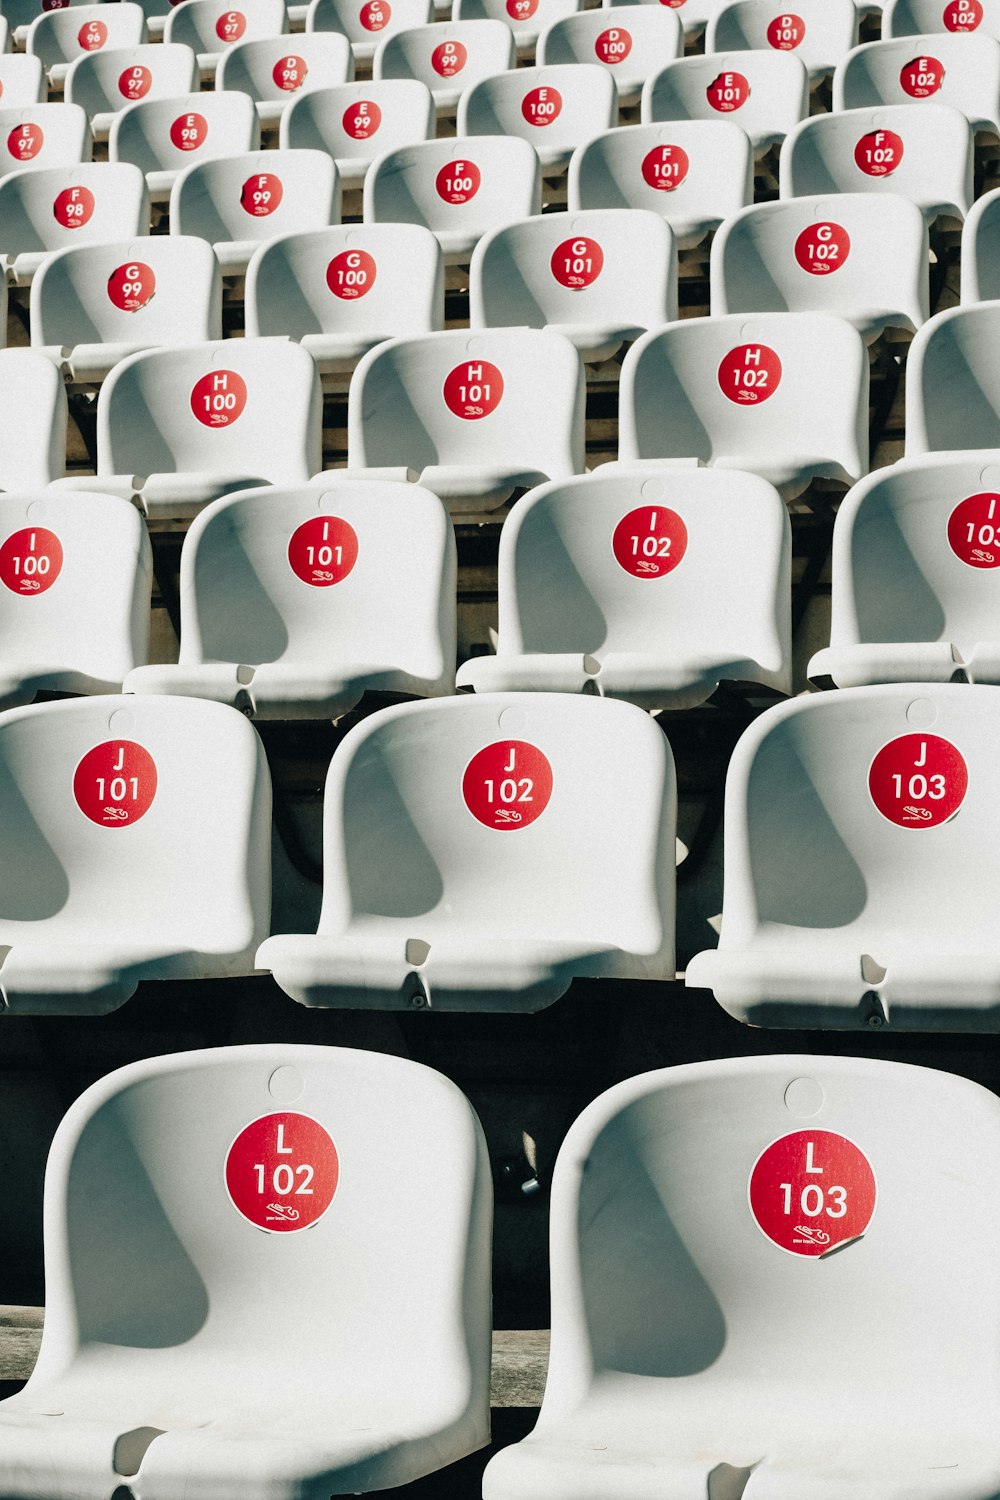 rows of white chairs with red numbers on them